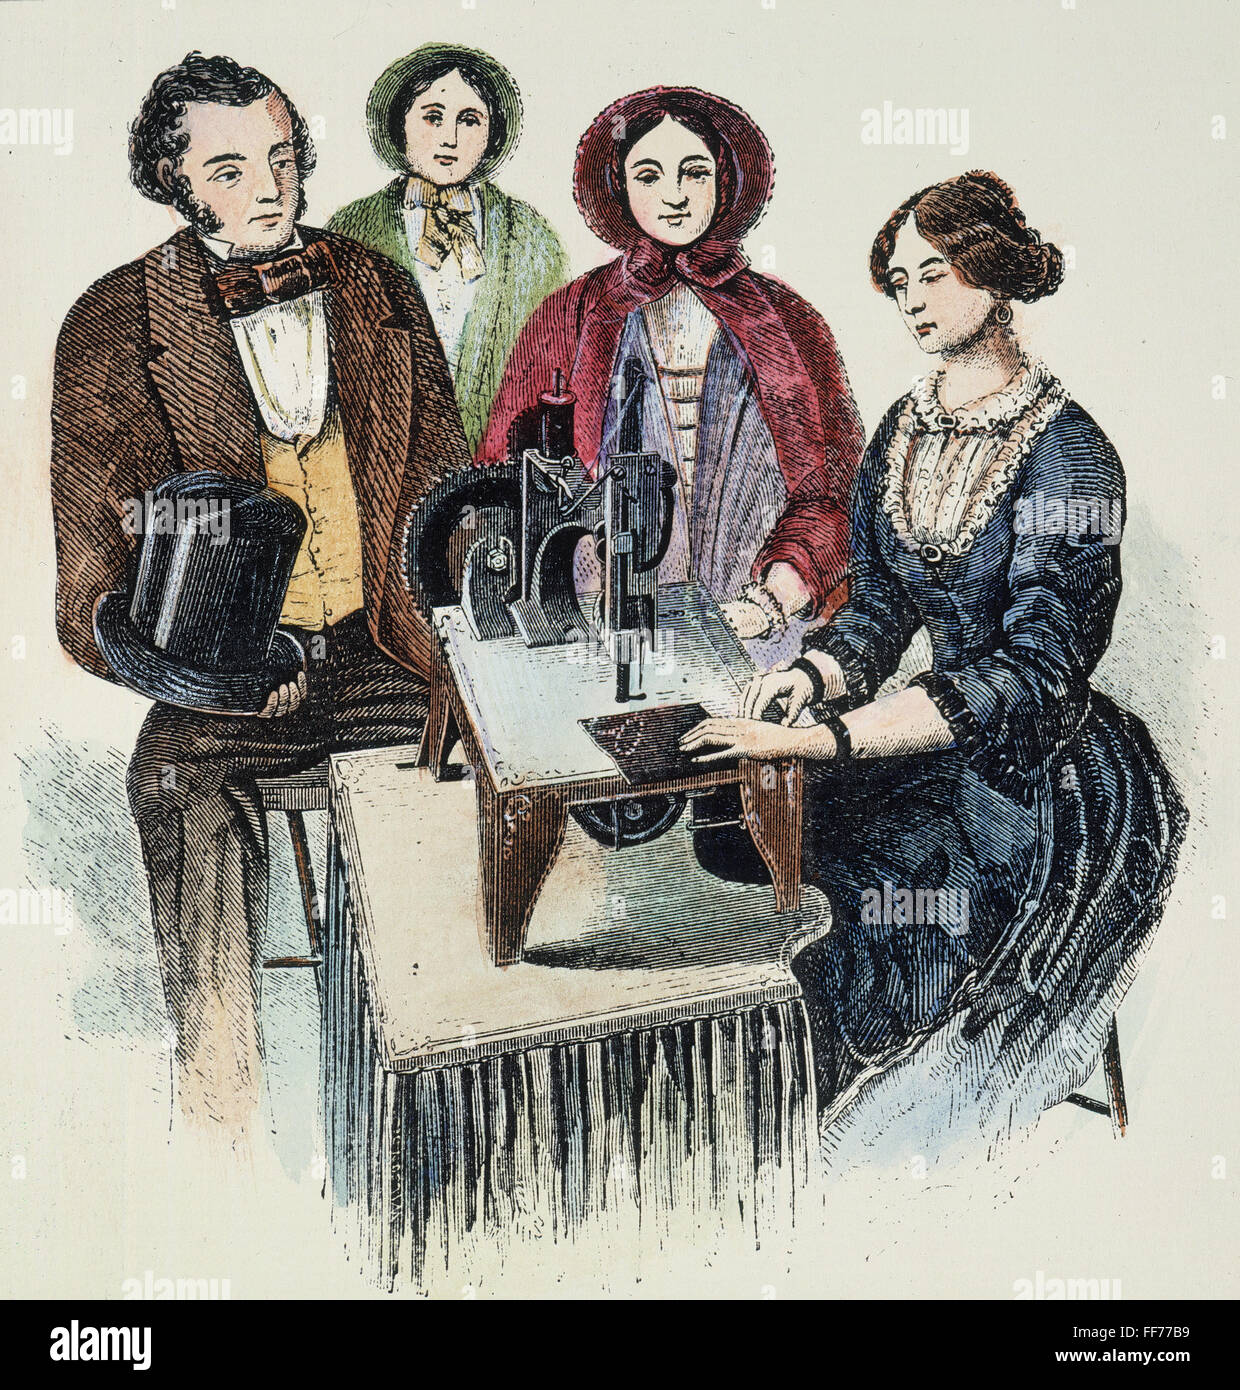 SINGER SEWING MACHINE, 1853. /nIsaac M. Singer supervising a demonstration of his perpendicular-action sewing machine at his office at 323 Broadway, New York City. Line engraving, c1853. Stock Photo